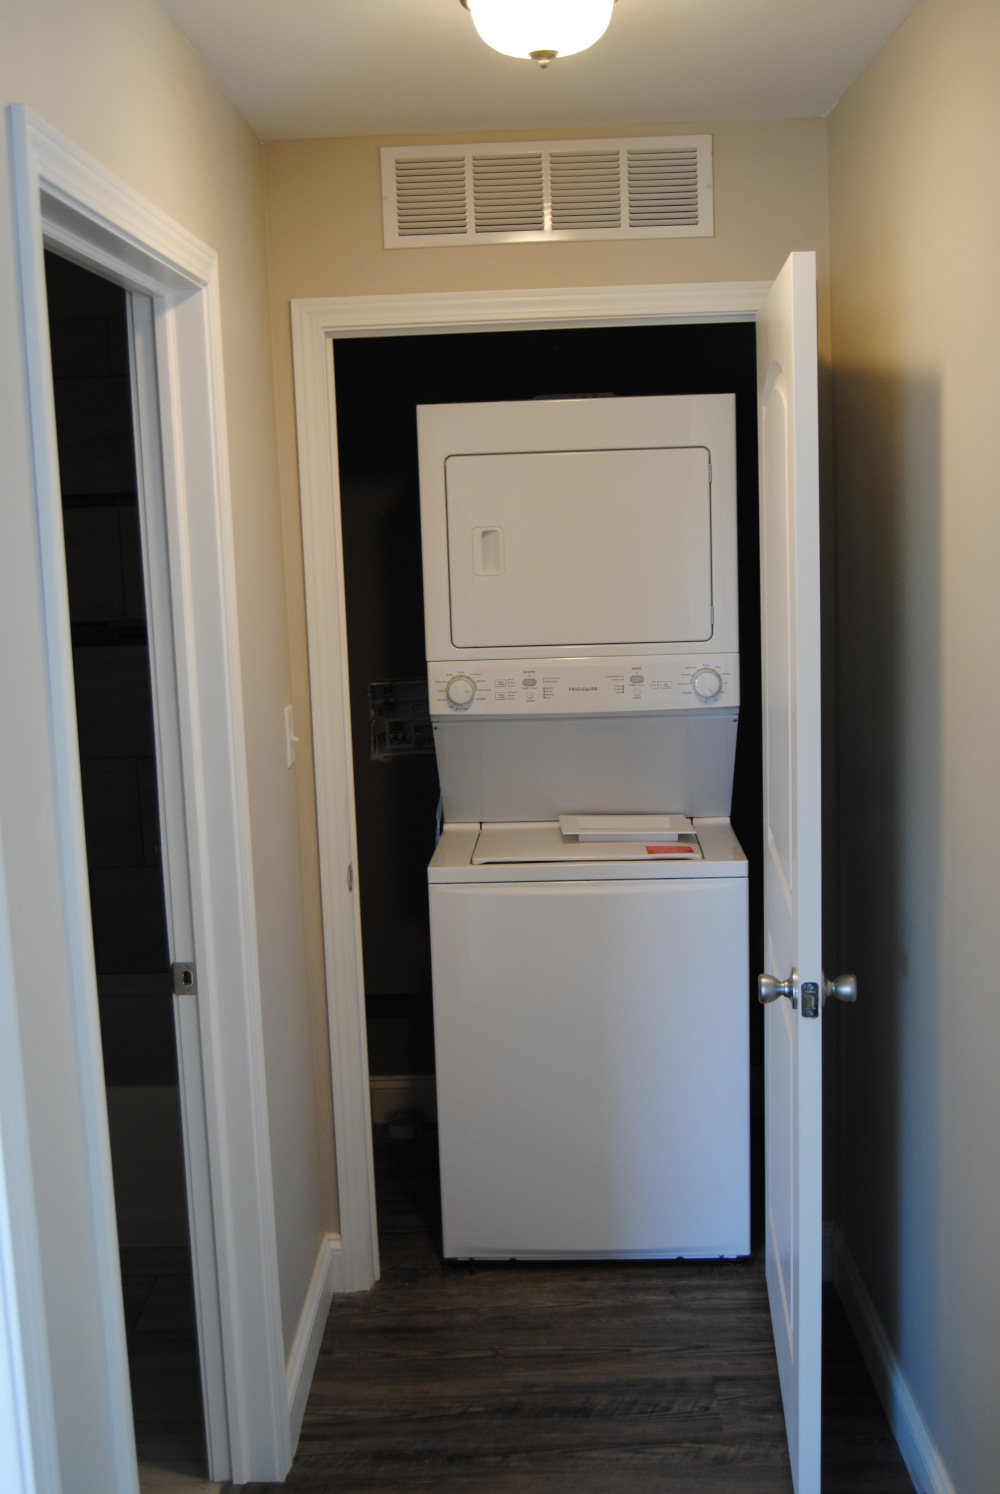 laundry room with washer and dryer unit